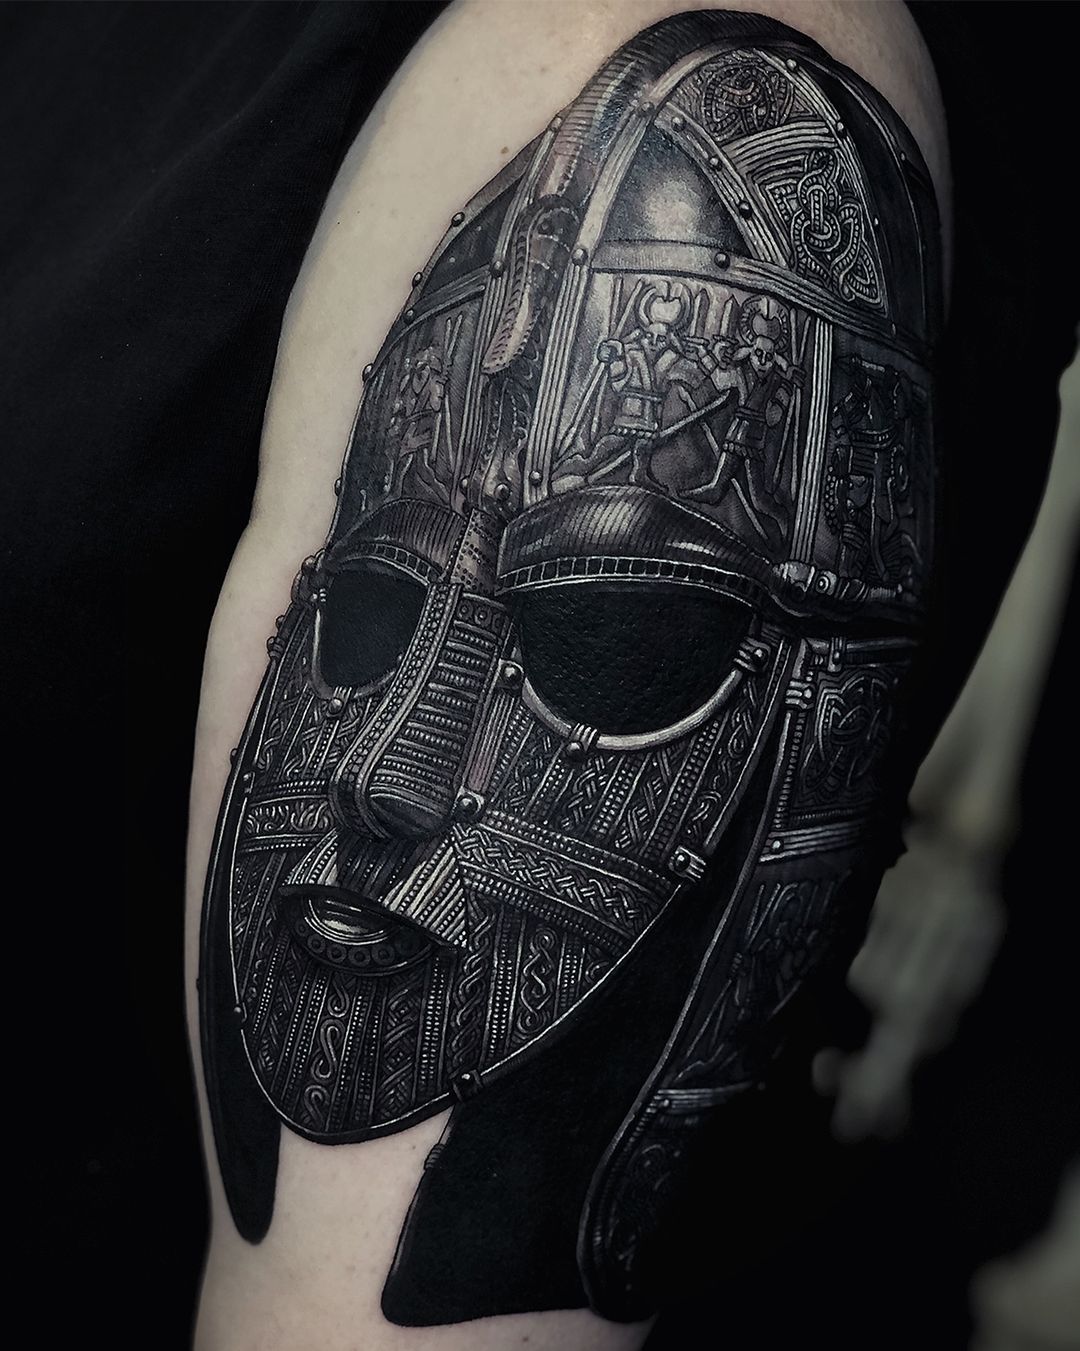 Supposed Anglo Saxon knight : r/shittytattoos